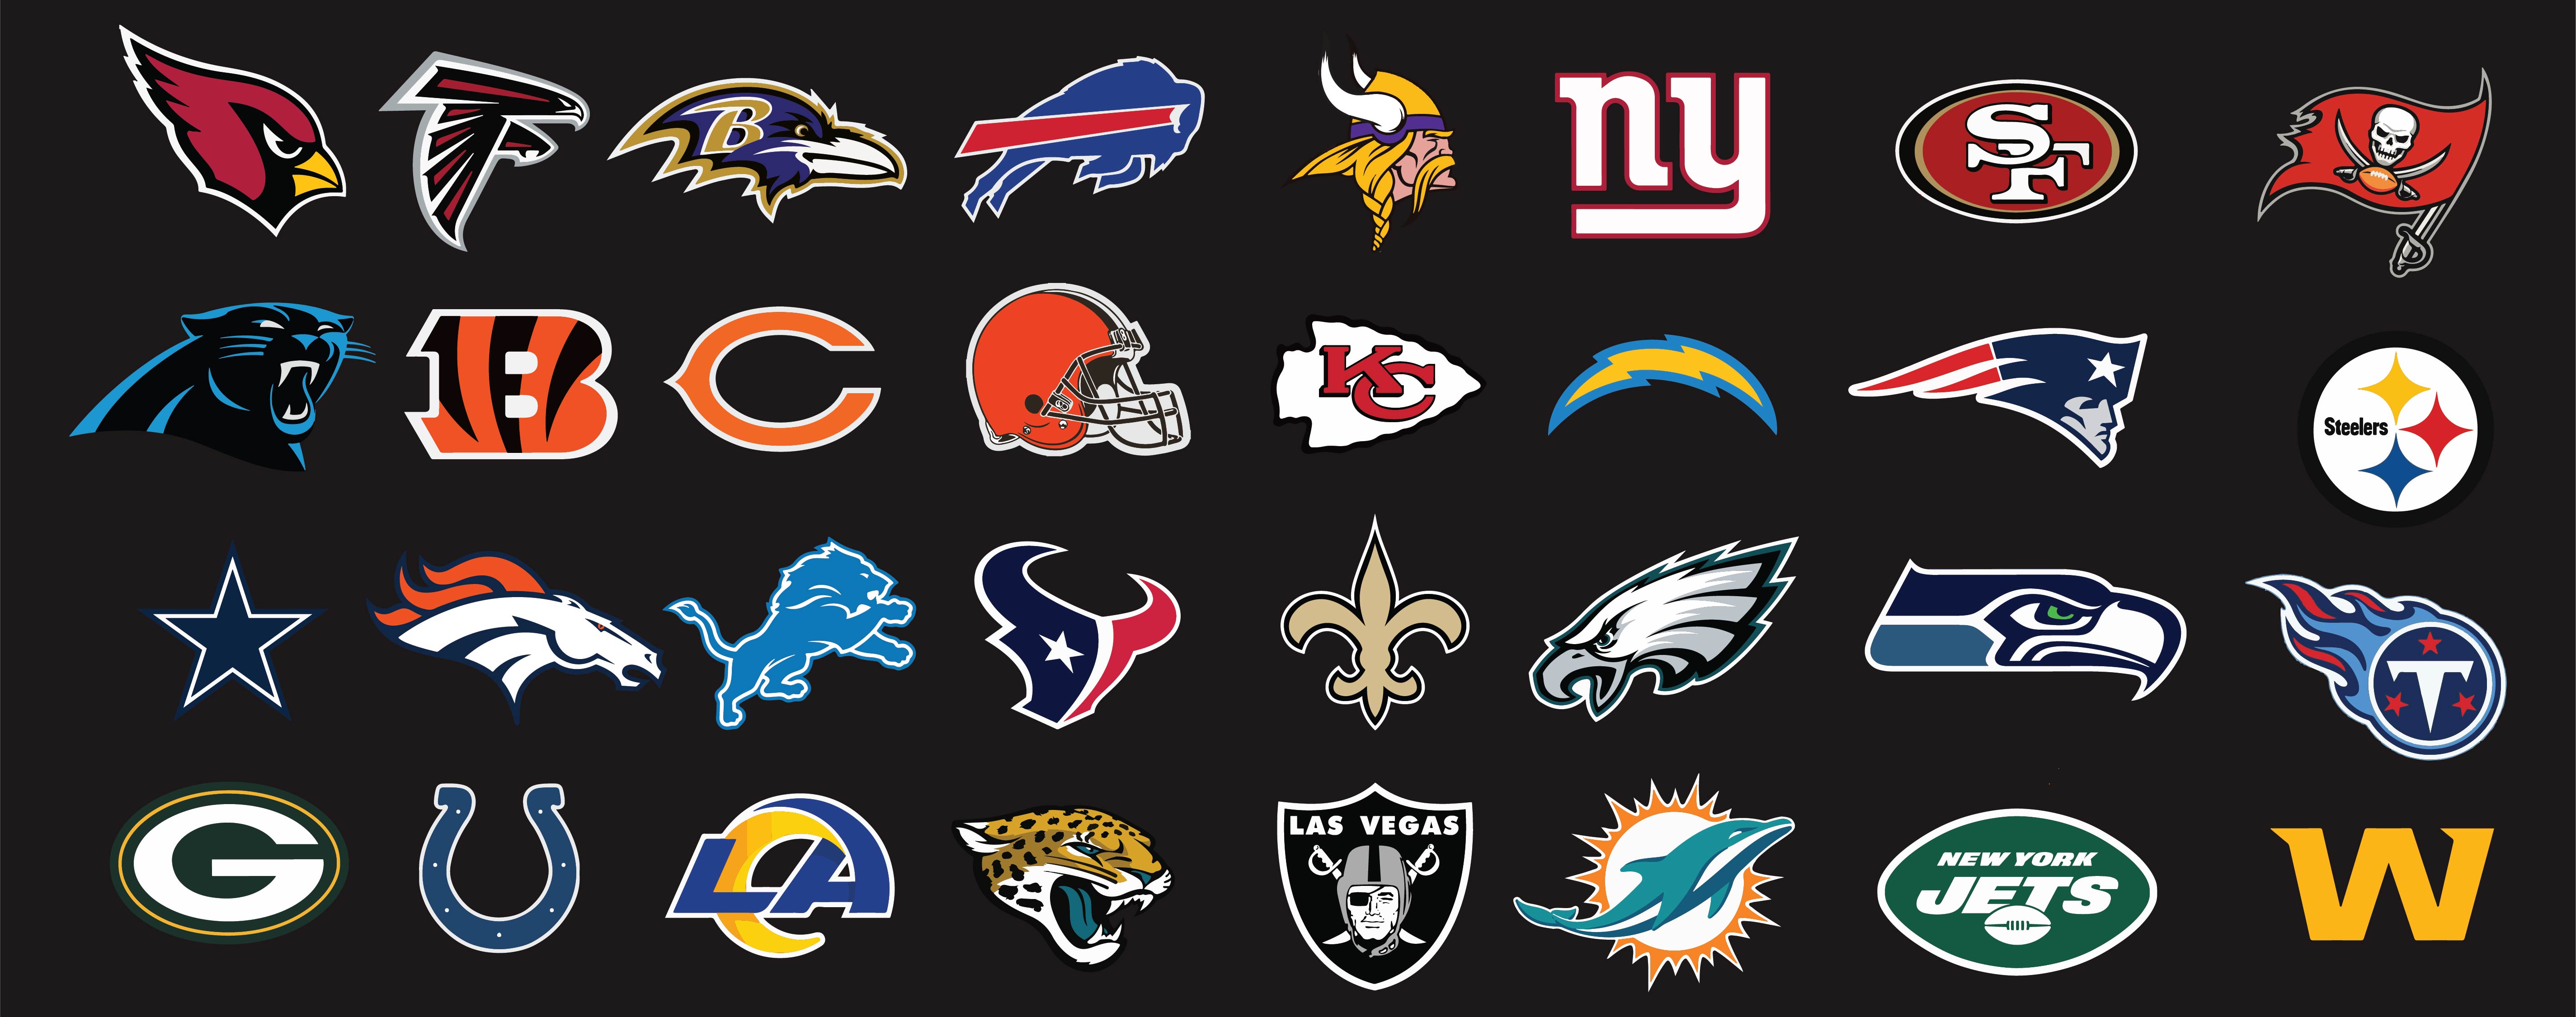 Nothing defines a football team more than its logo, helmets, and uniforms. 7 Best Images of NFL Football Logos Printable - NFL Football Team Logo